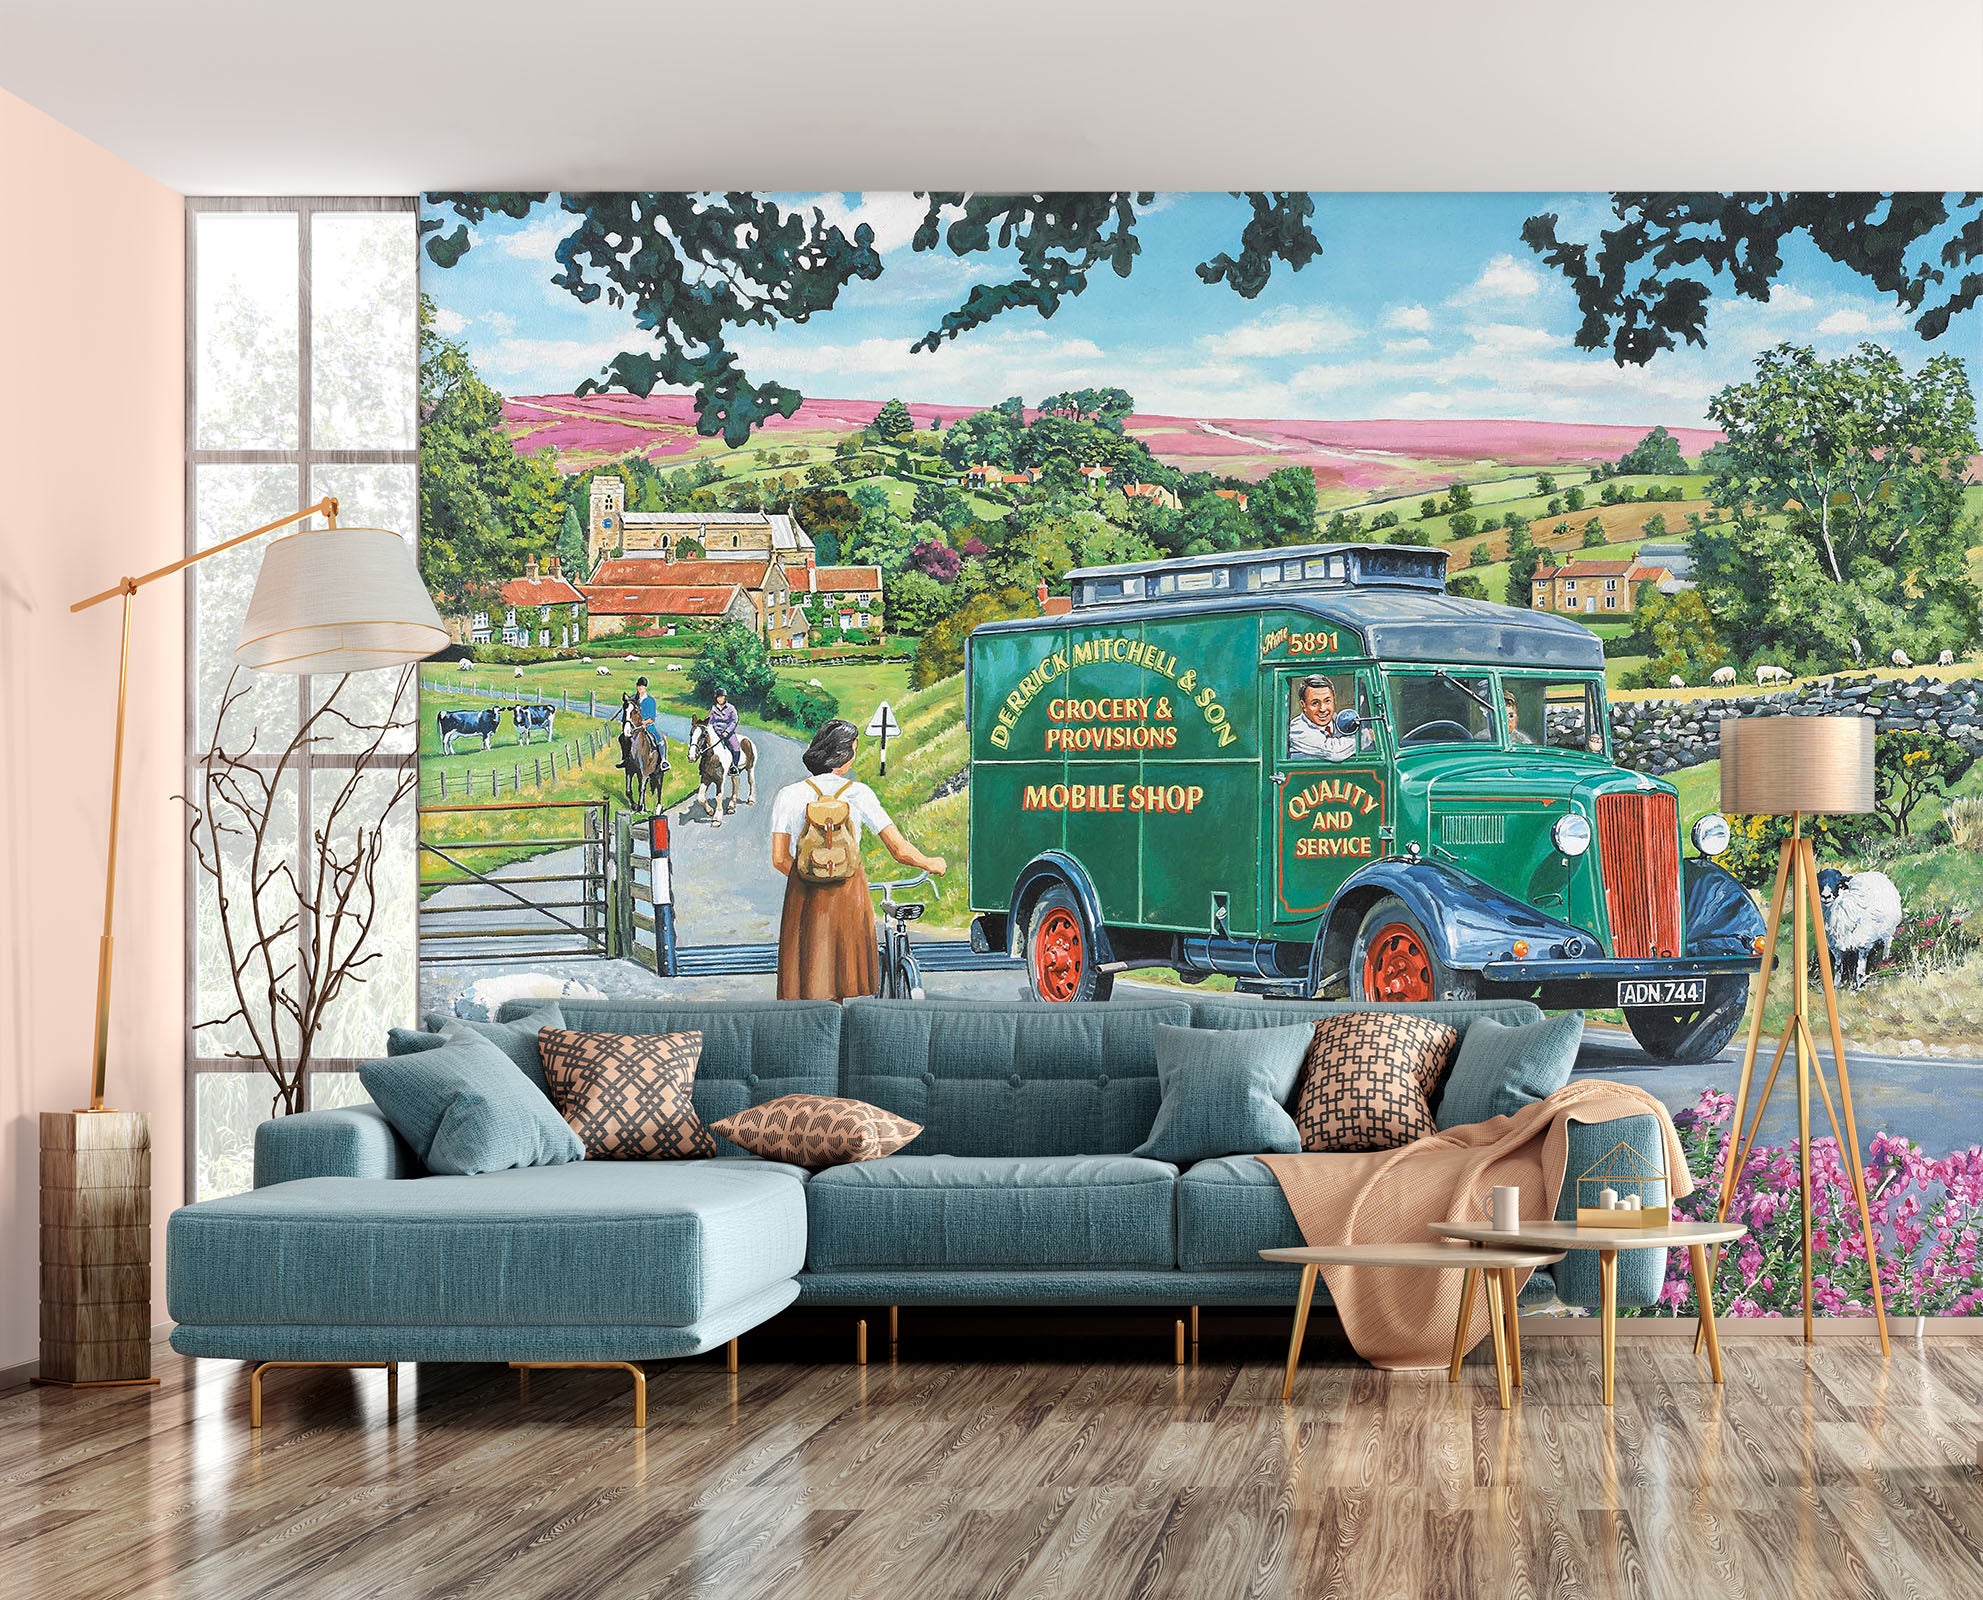 3D Over Hill And Dale 1042 Trevor Mitchell Wall Mural Wall Murals